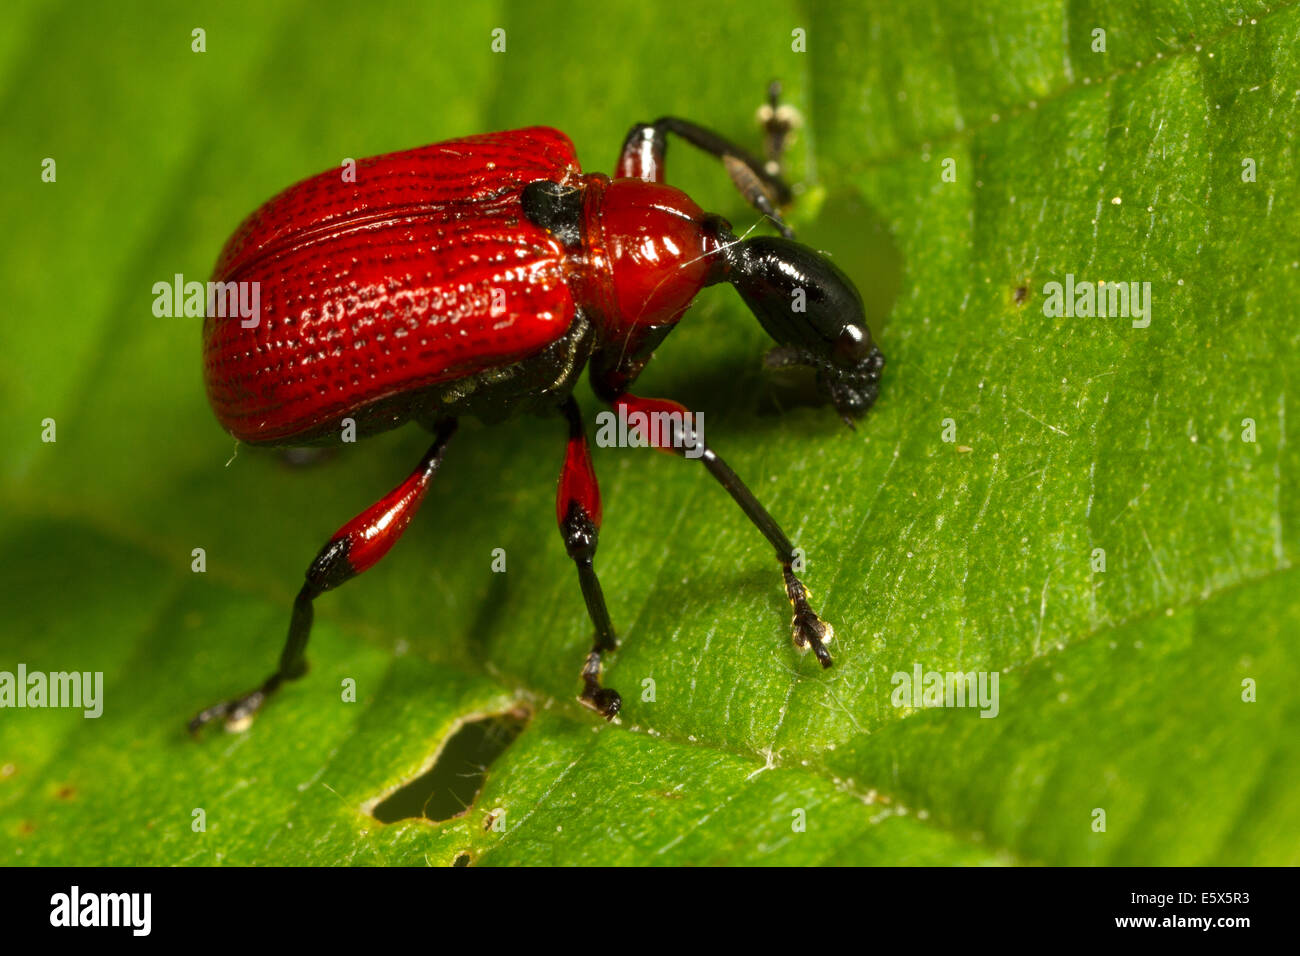 Apoderus coryli, a small red weevil, eating a hazel leaf Stock Photo